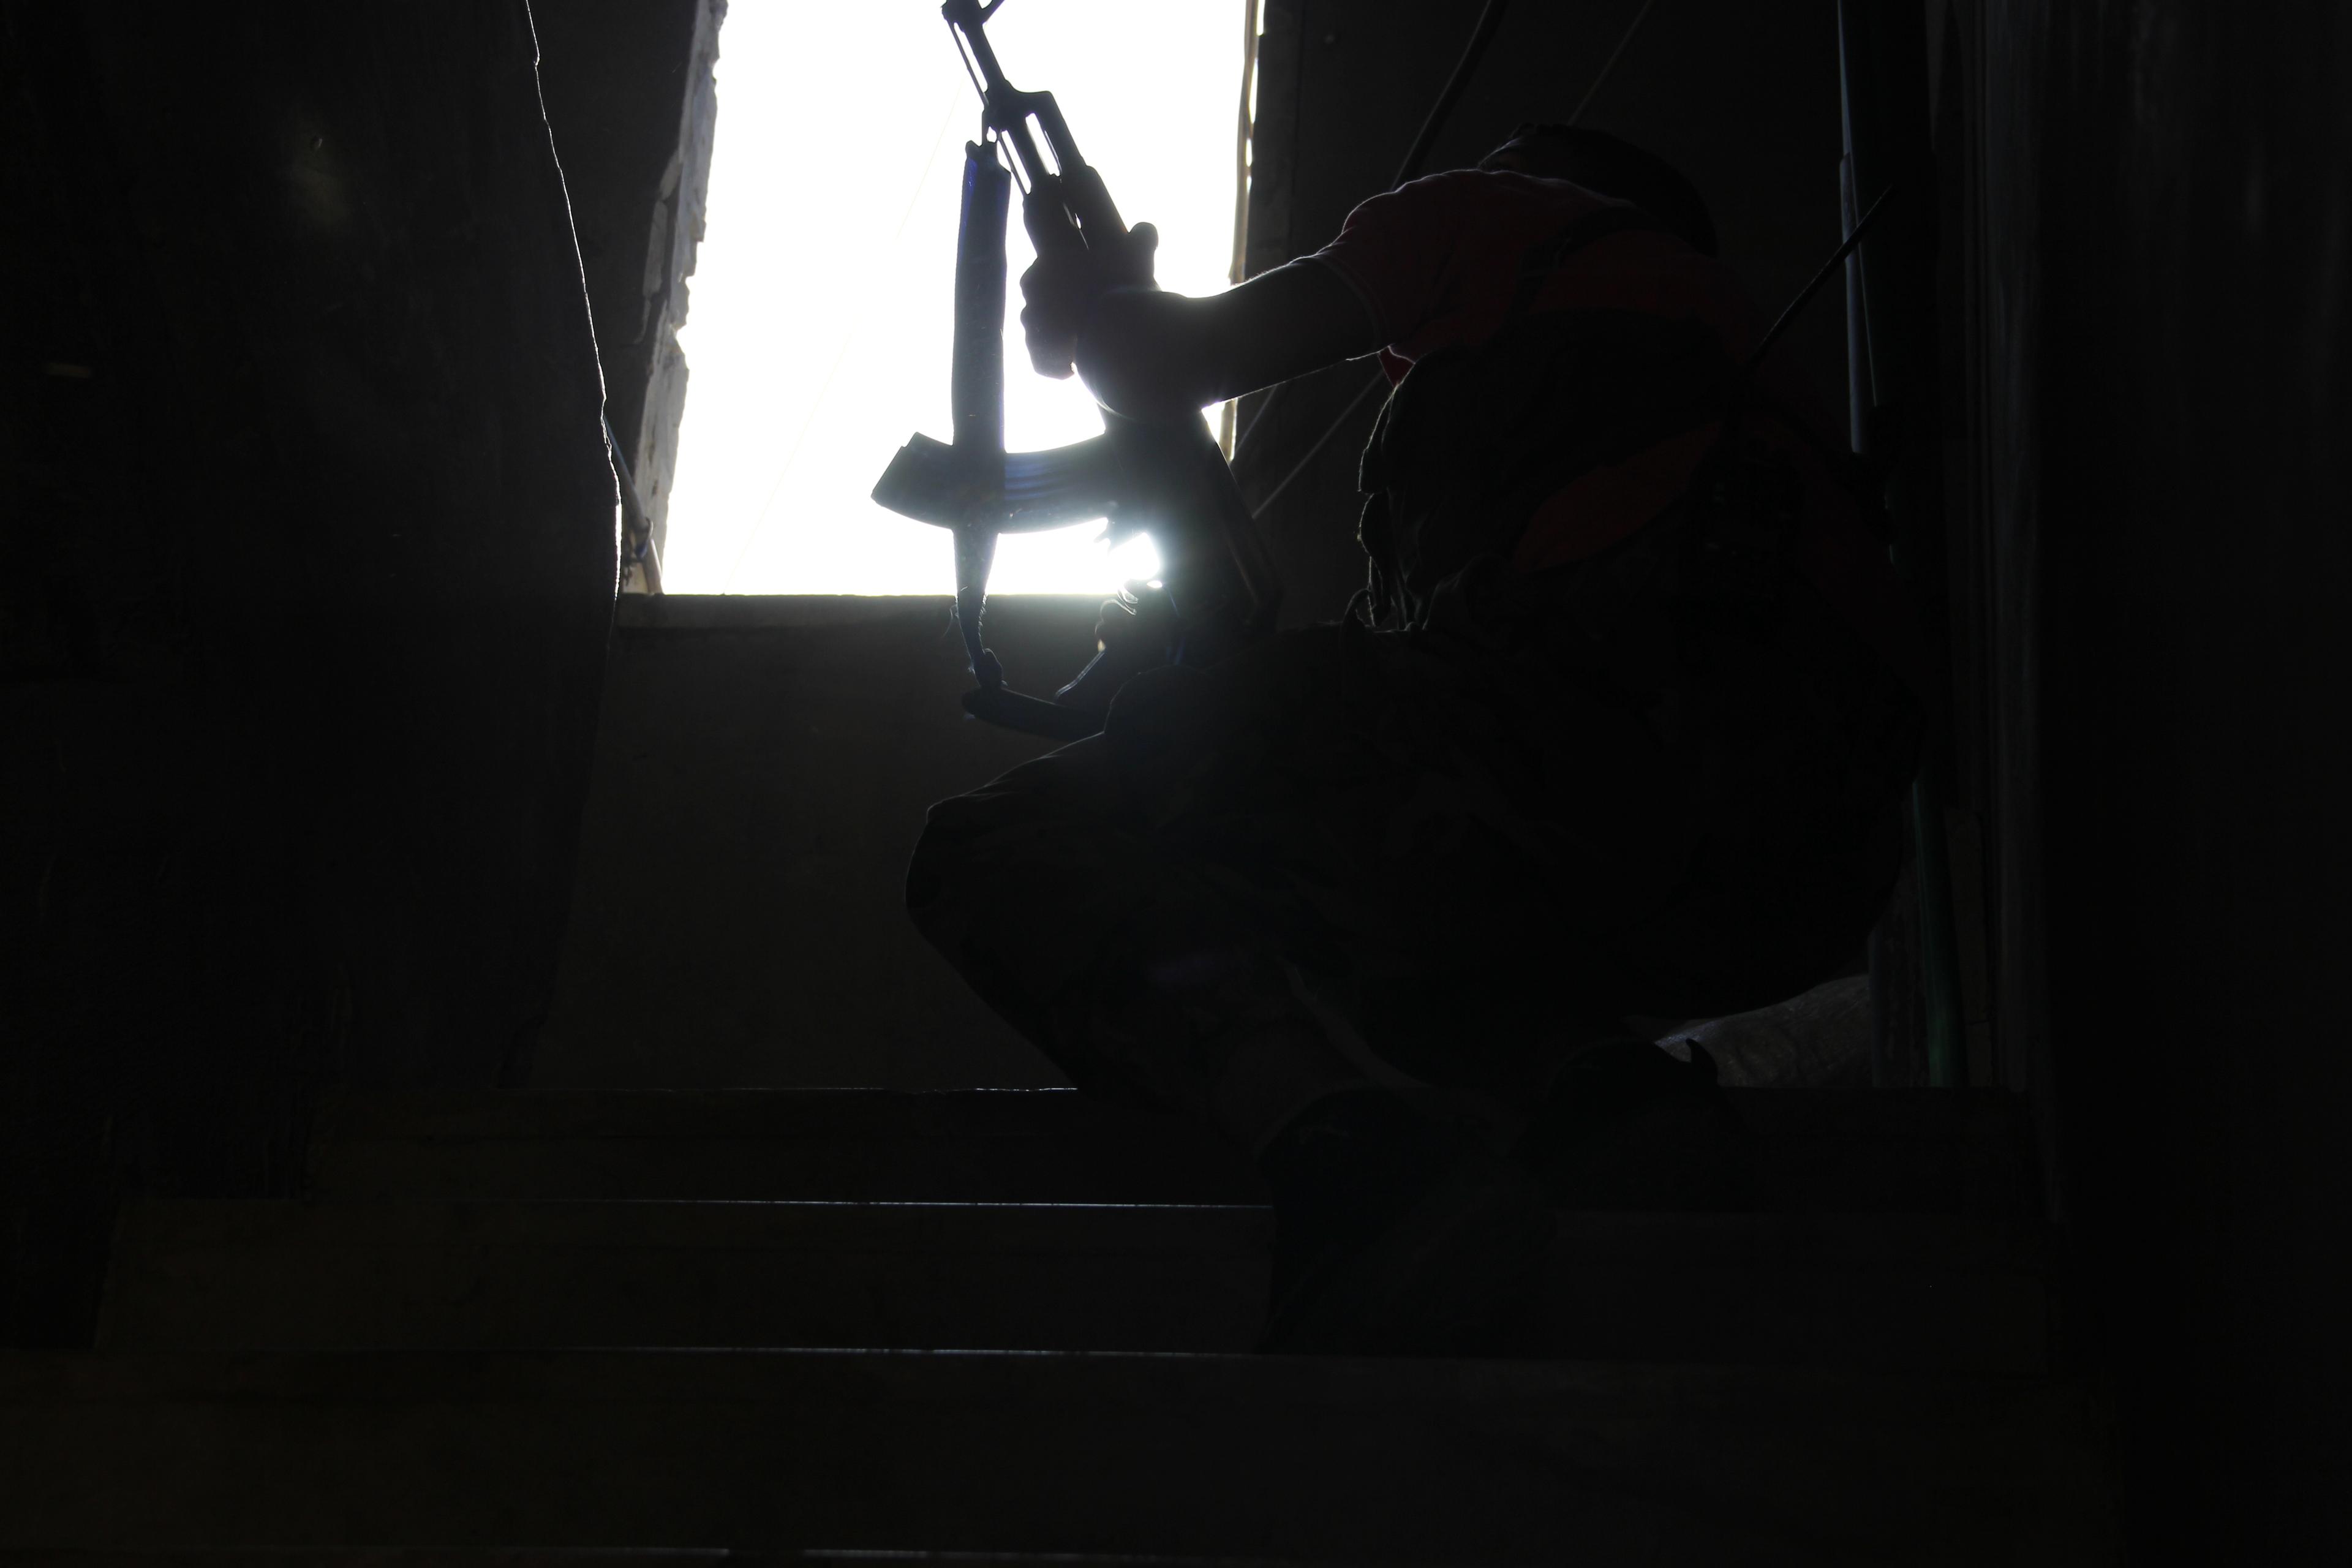 Man of the darkness - A Free Syrian Army on the frontline